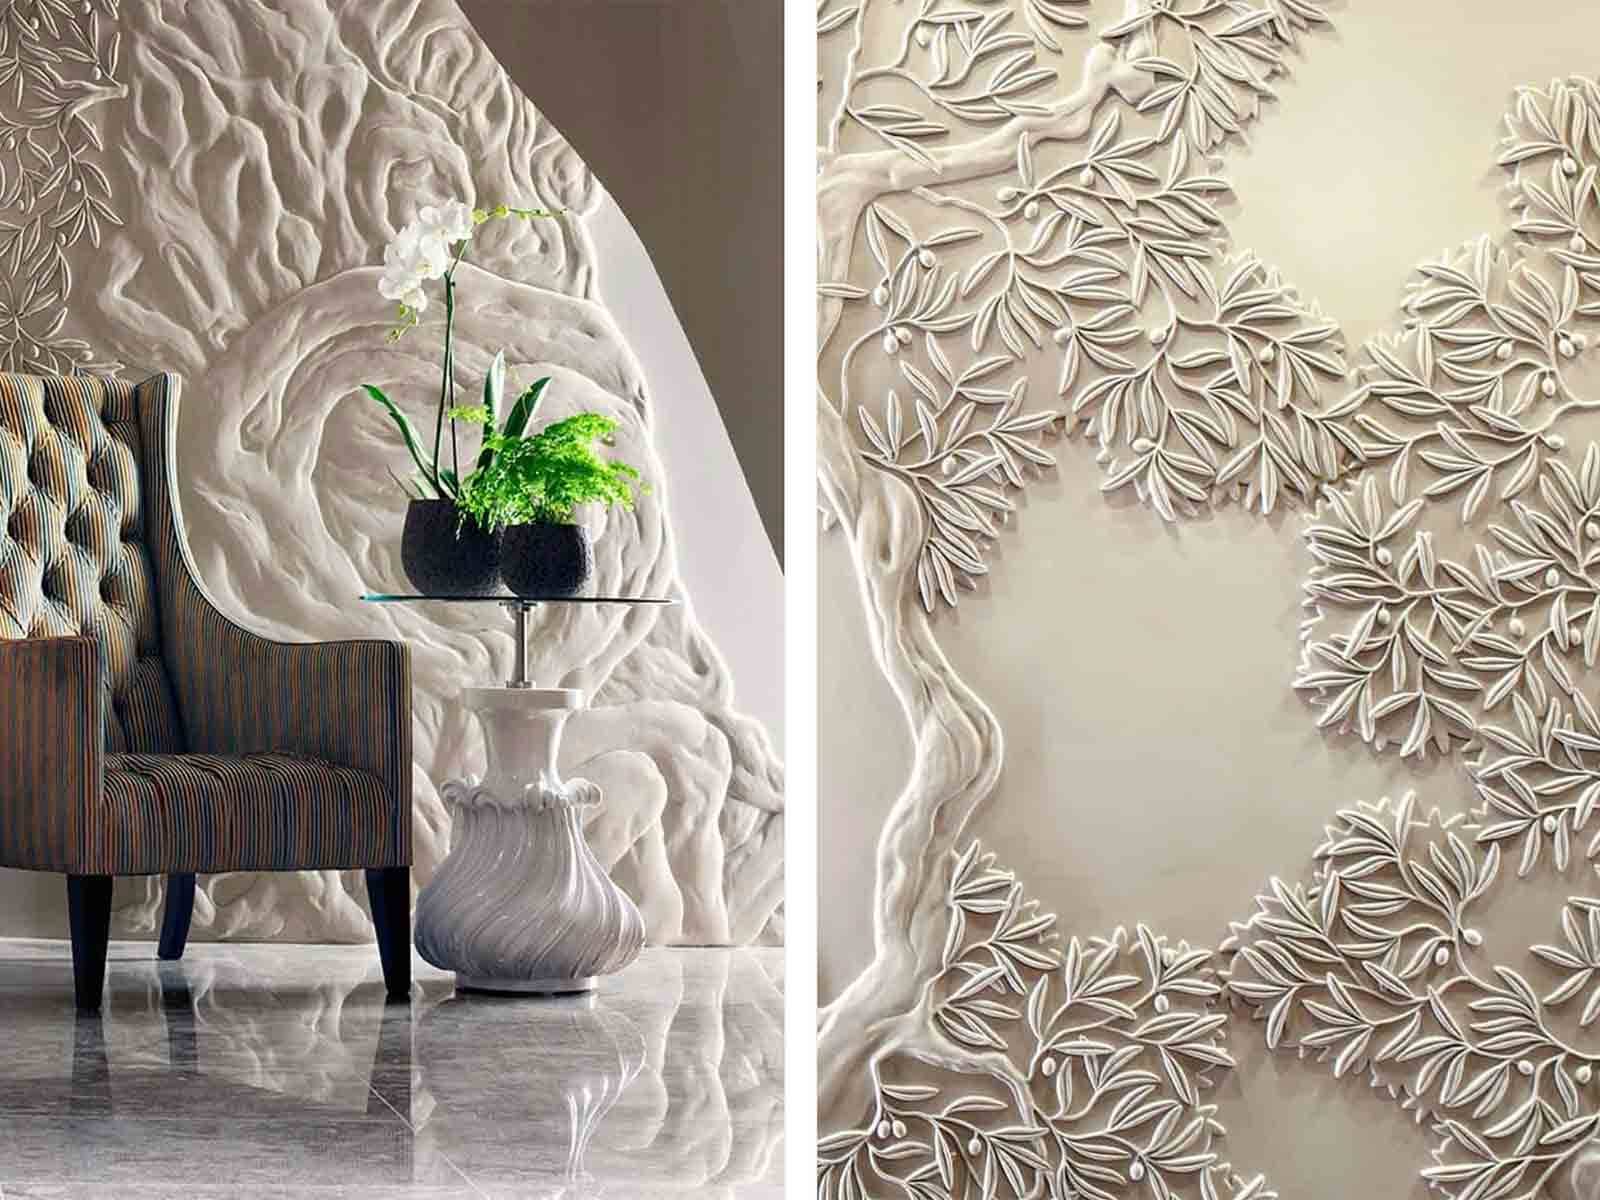 Olive tree design bas-relief, staircase